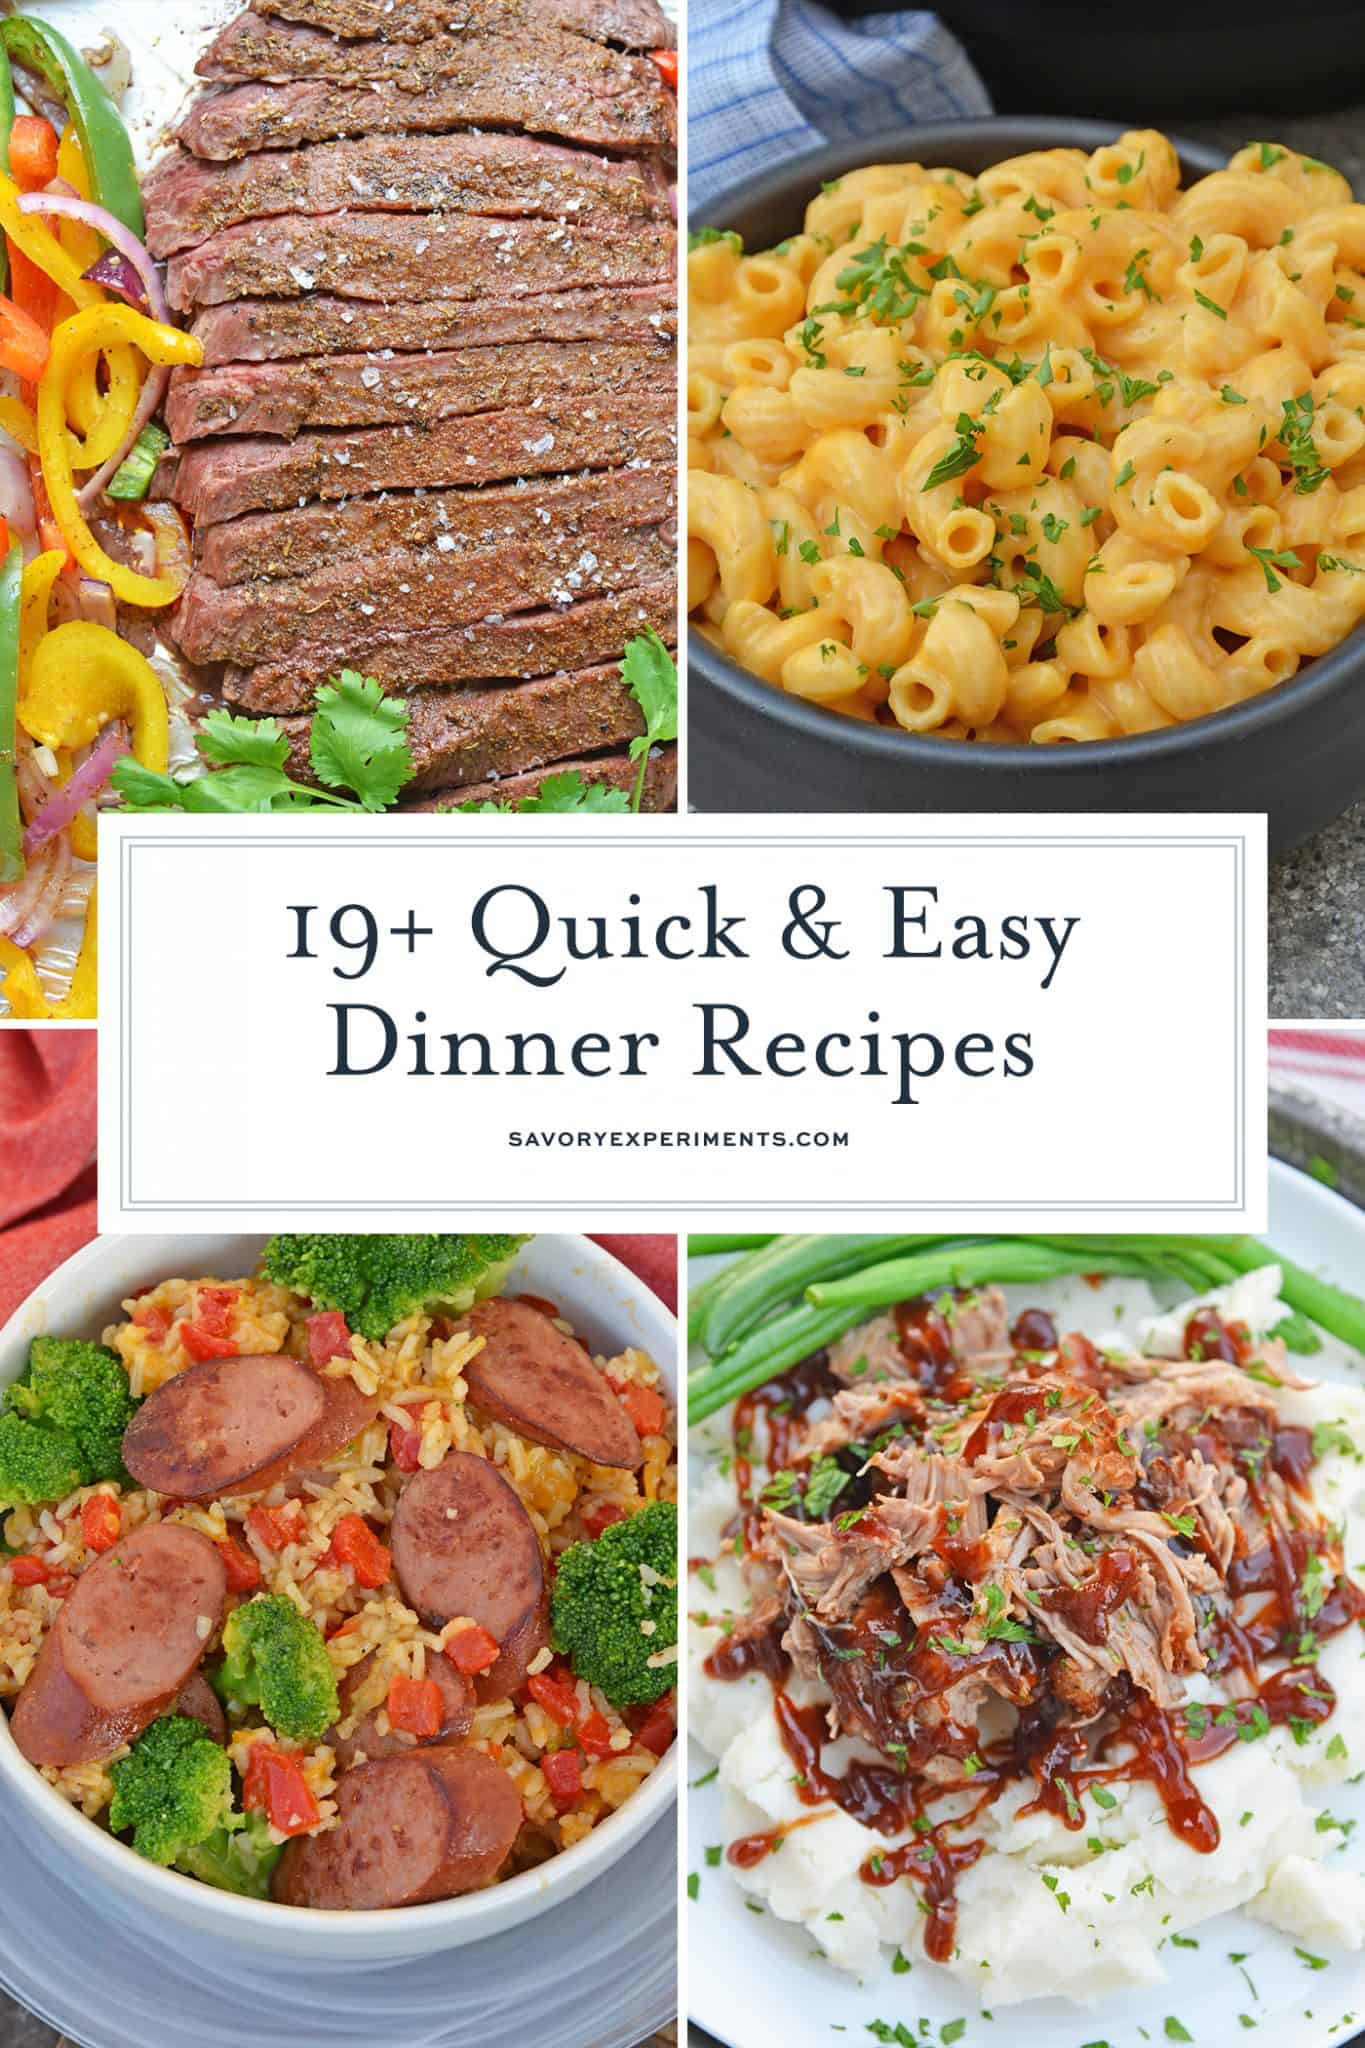 22 Ideas for Quick and Easy Meals for Dinner - Home, Family, Style and ...